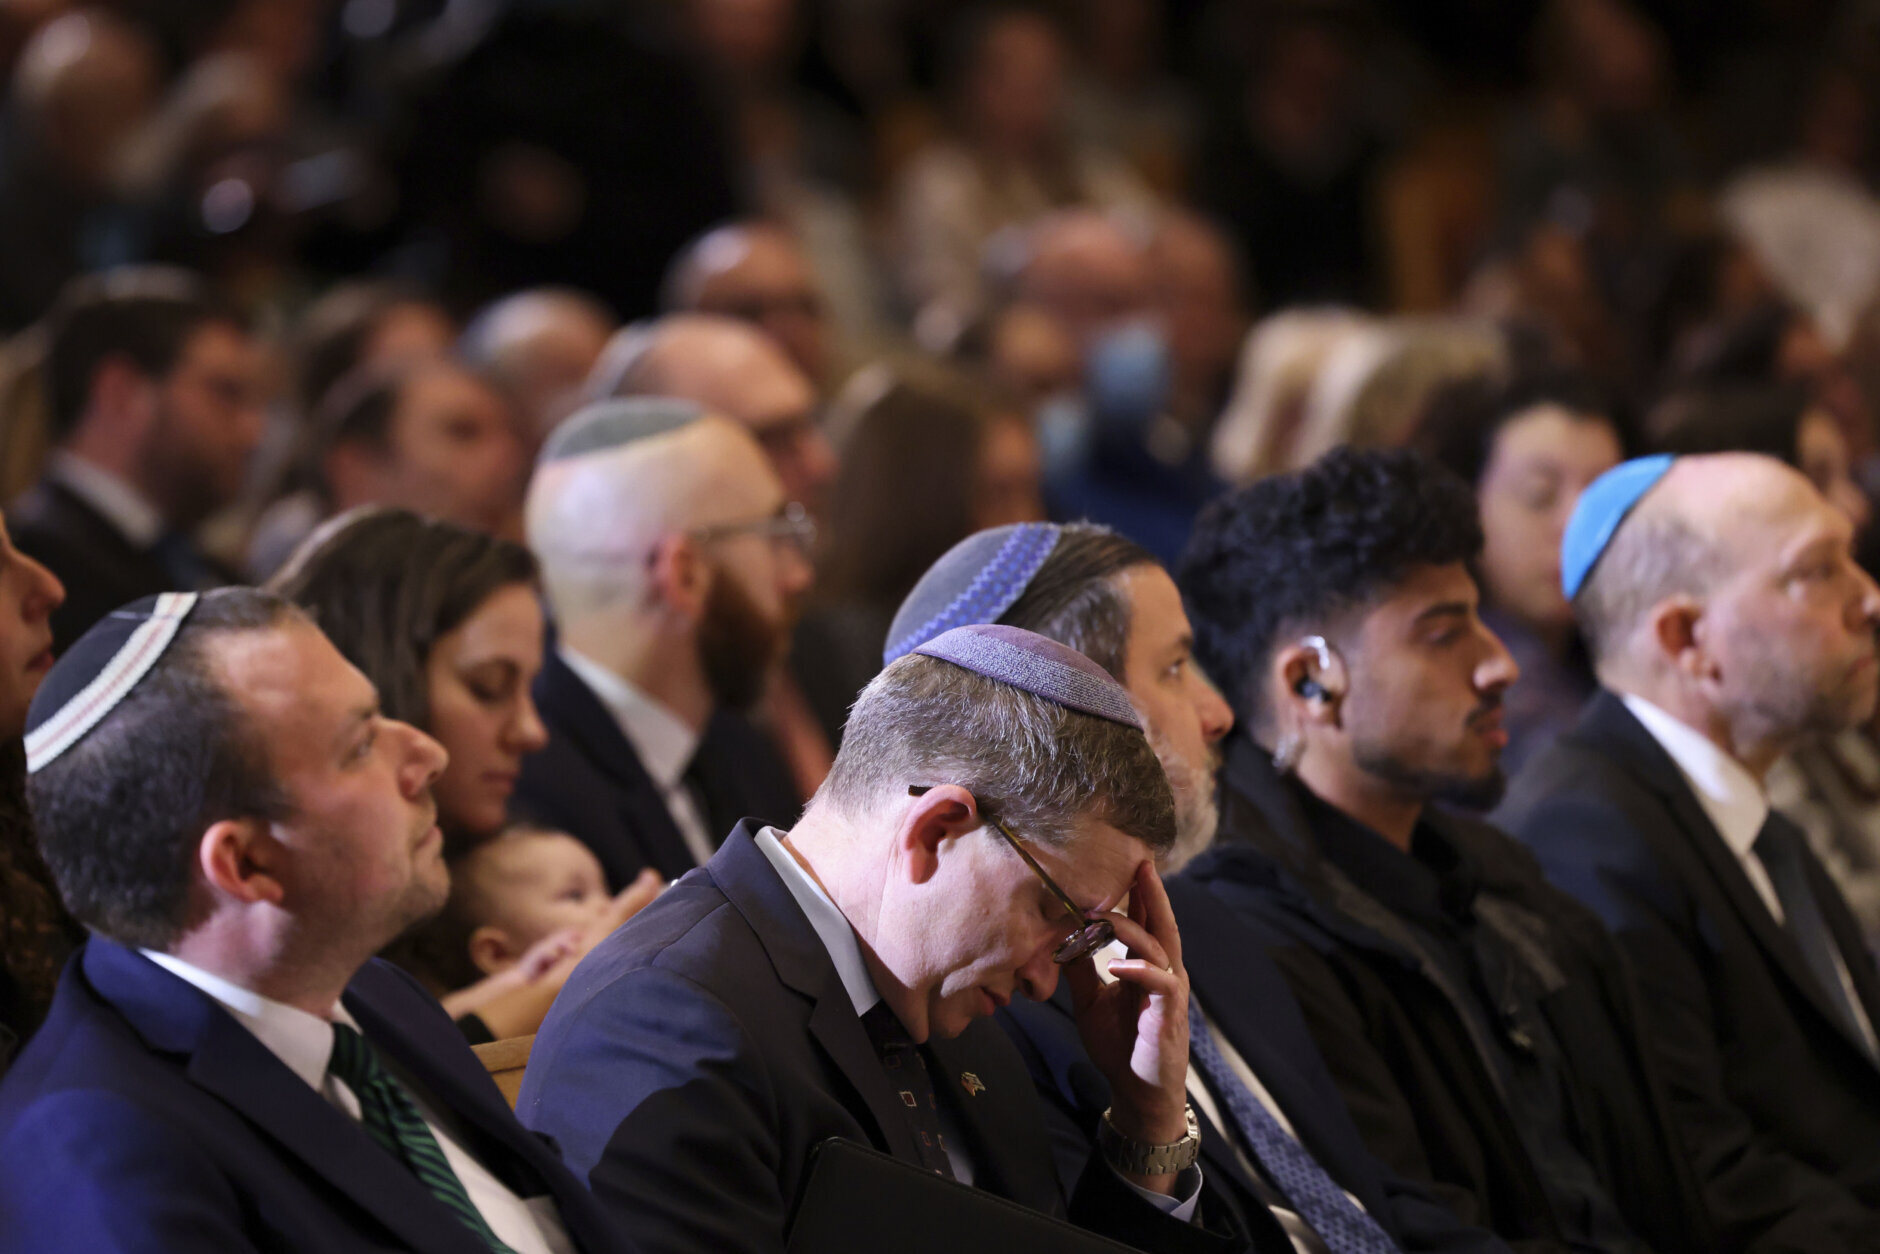 <p>Adas Senior Rabbi Lauren Holtzblatt spoke in front of her congregation, saying, &#8220;We are a family in deep pain. We are mourning. We are cracked open.&#8221;</p>
<p>&#8220;Each tragic loss of life, each hostage taken, each wounded person is not just another number, but an entire world,&#8221; she added. &#8220;But we are not broken. We will never despair because no evil force can break thousands of years of communal resilience. Resilience is our birthright, it&#8217;s in our DNA.&#8221;</p>
